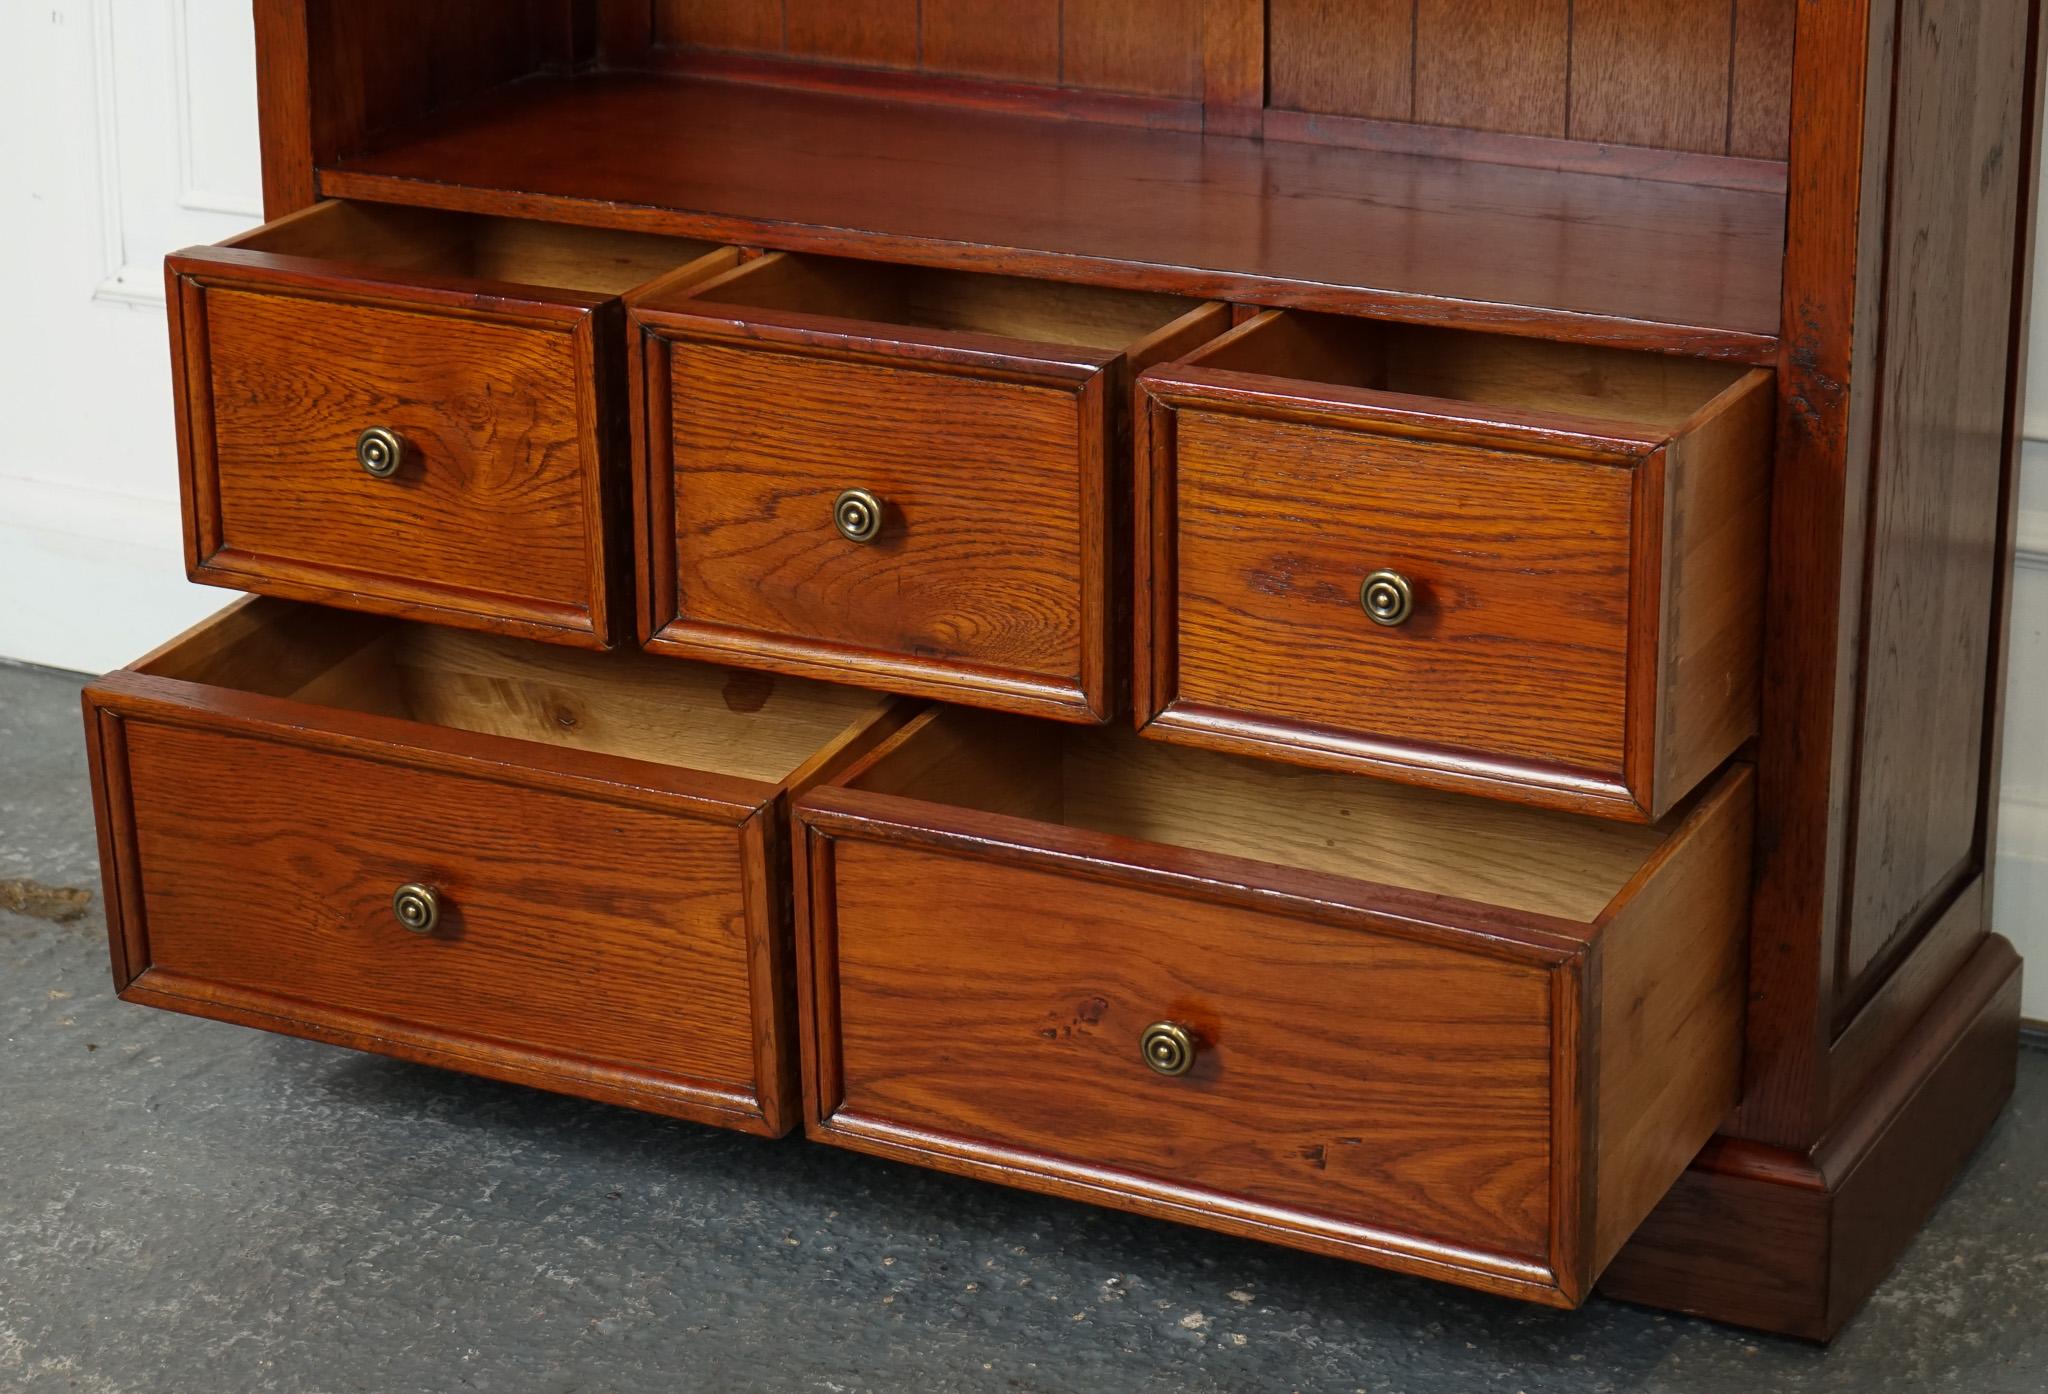 LOVELY VINTAGE TEAK OPEN BOOKCASE WITH 5 DRAWERS BRASS HANDLES j1 In Good Condition For Sale In Pulborough, GB